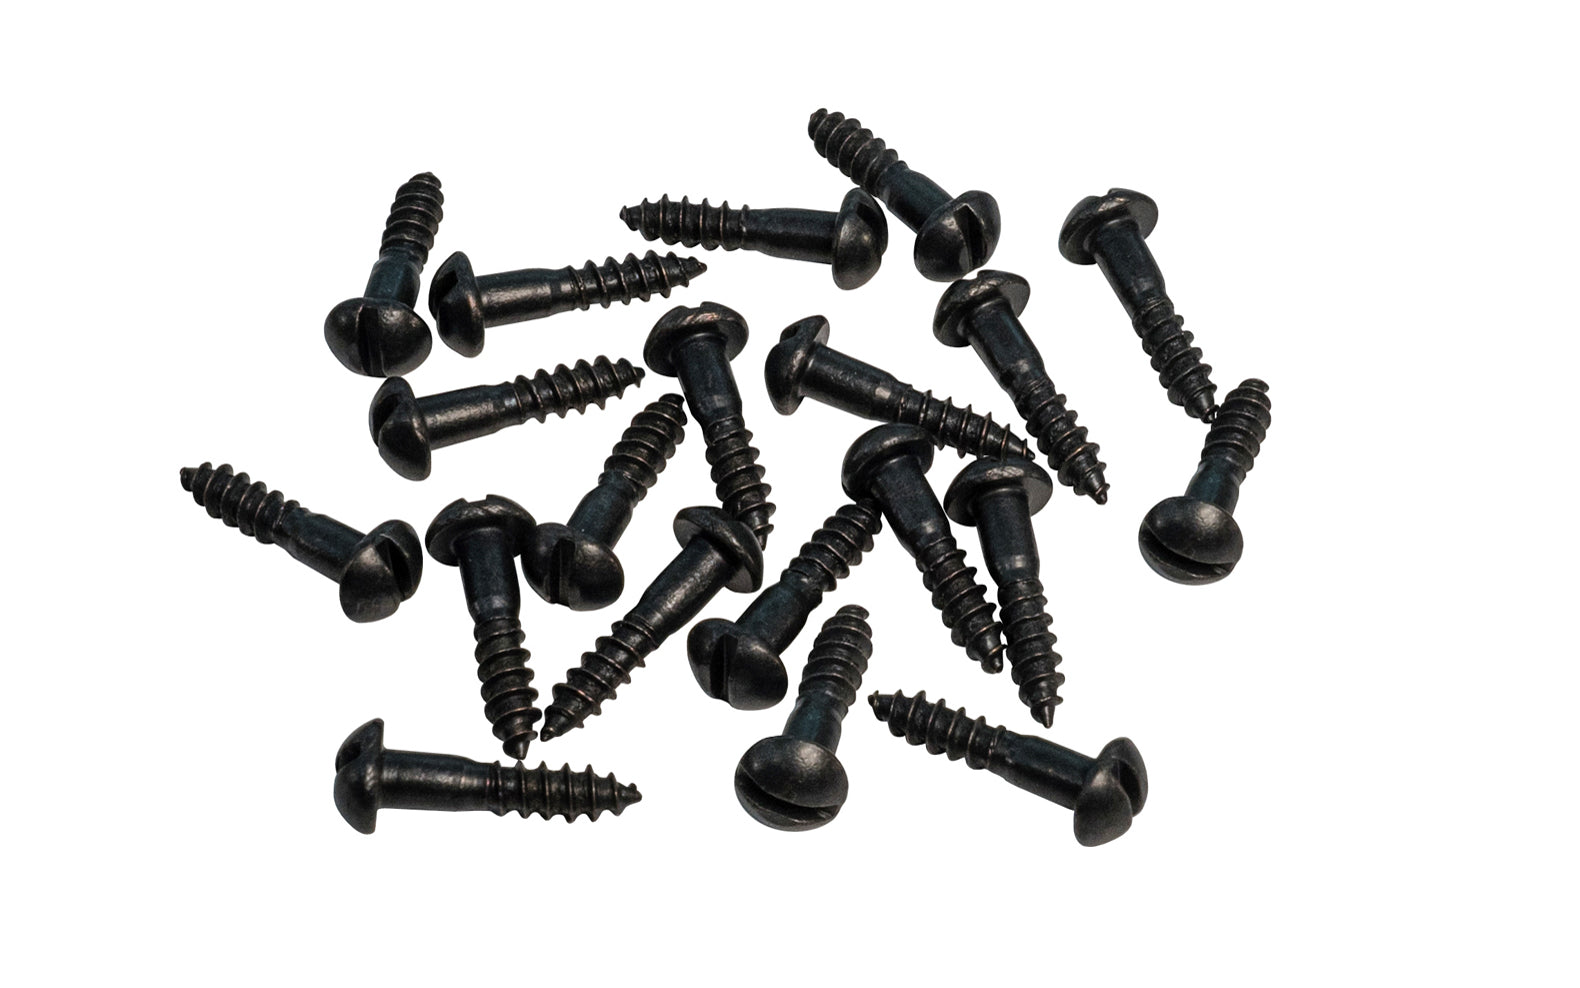 Solid Brass #5 x 5/8" Round Head Slotted Wood Screws. Traditional & classic vintage-style wood screws. Sold as 20 pieces in a bag. Oil Rubbed Bronze finish. Slotted Head